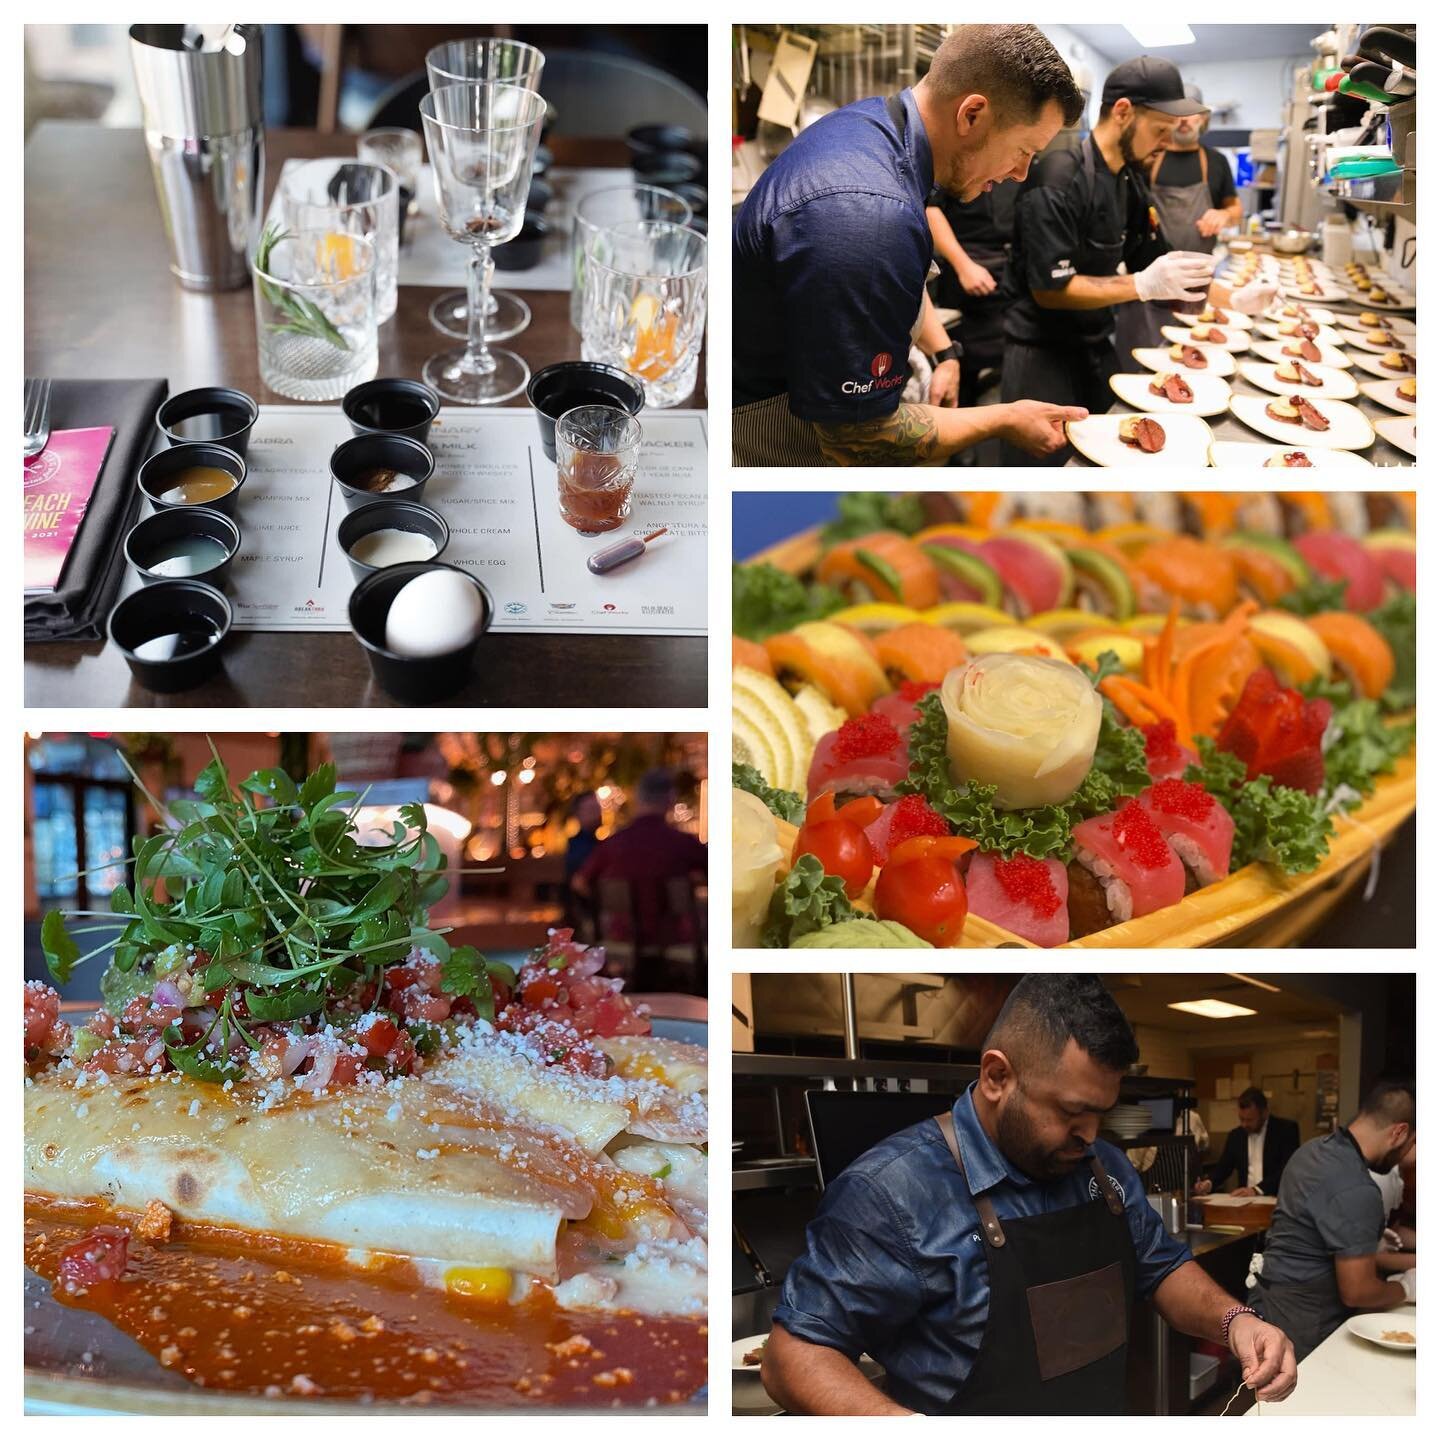 We are honored to be home to 3️⃣ @pbfoodwinefest events this year: &lsquo;Crafting Cocktails, a Mixology Class&rsquo; at @theparchedpig with guest chef @grapicavoli, &lsquo;Lunch at Ela&rsquo; at @elacurrykitchen with guest chef @chefniven and &lsquo